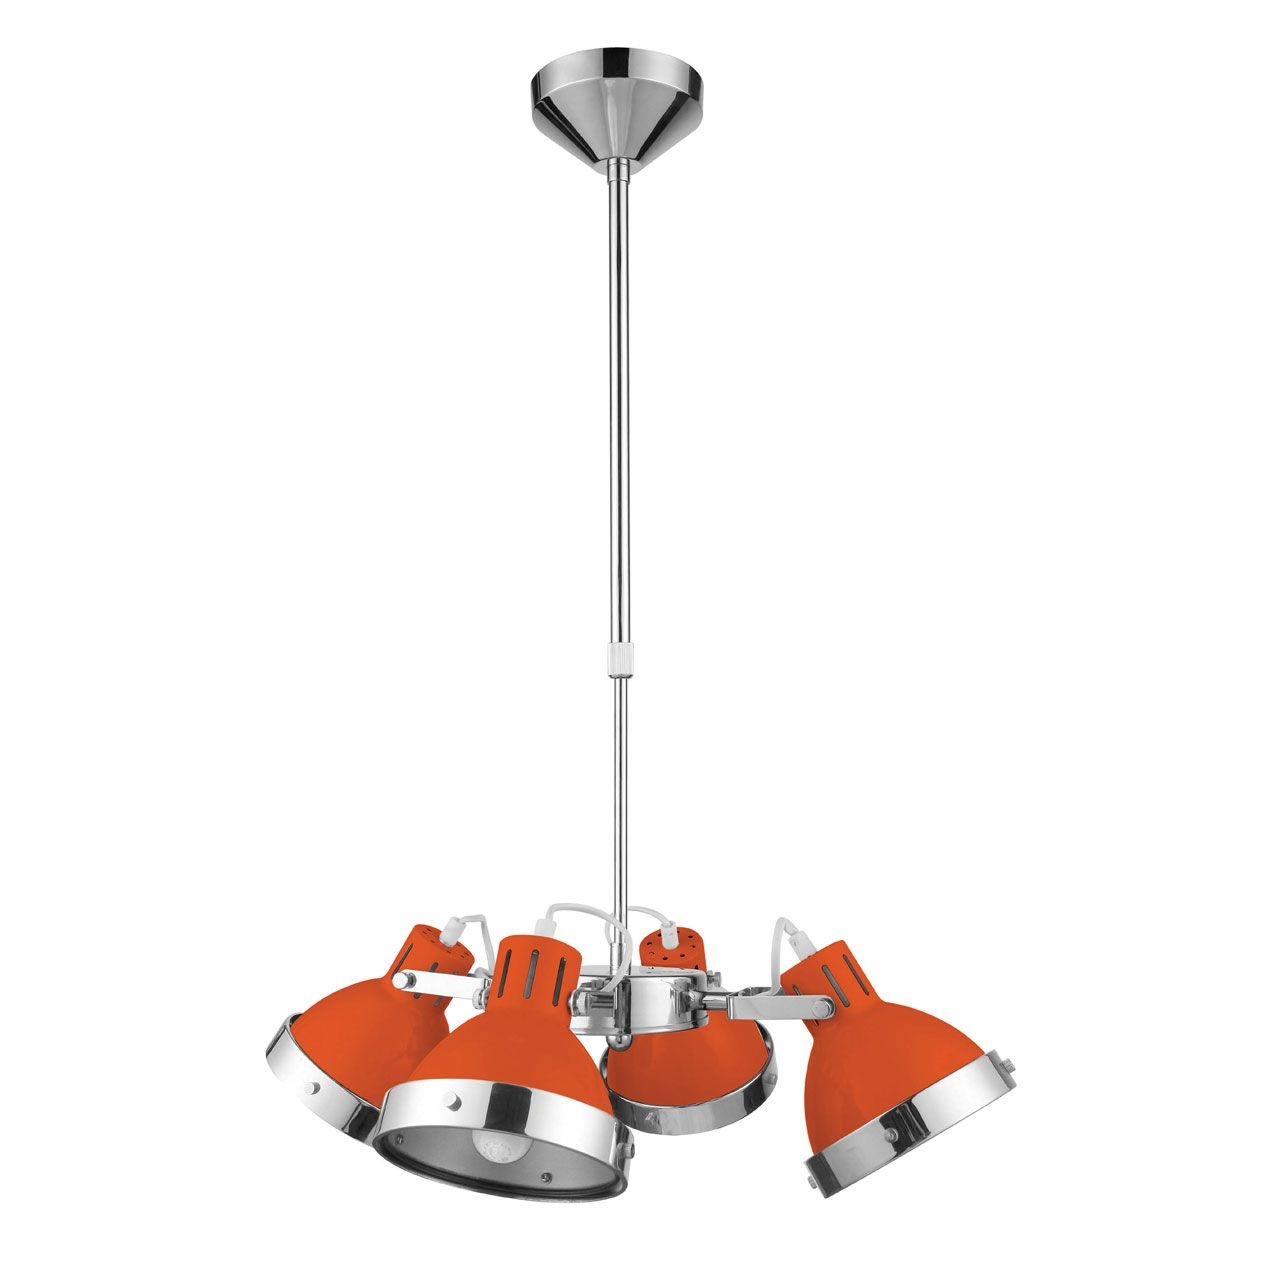 Hexon Contemporary 4 Metal Shades Ceiling Pendant Light In Orange And Chrome